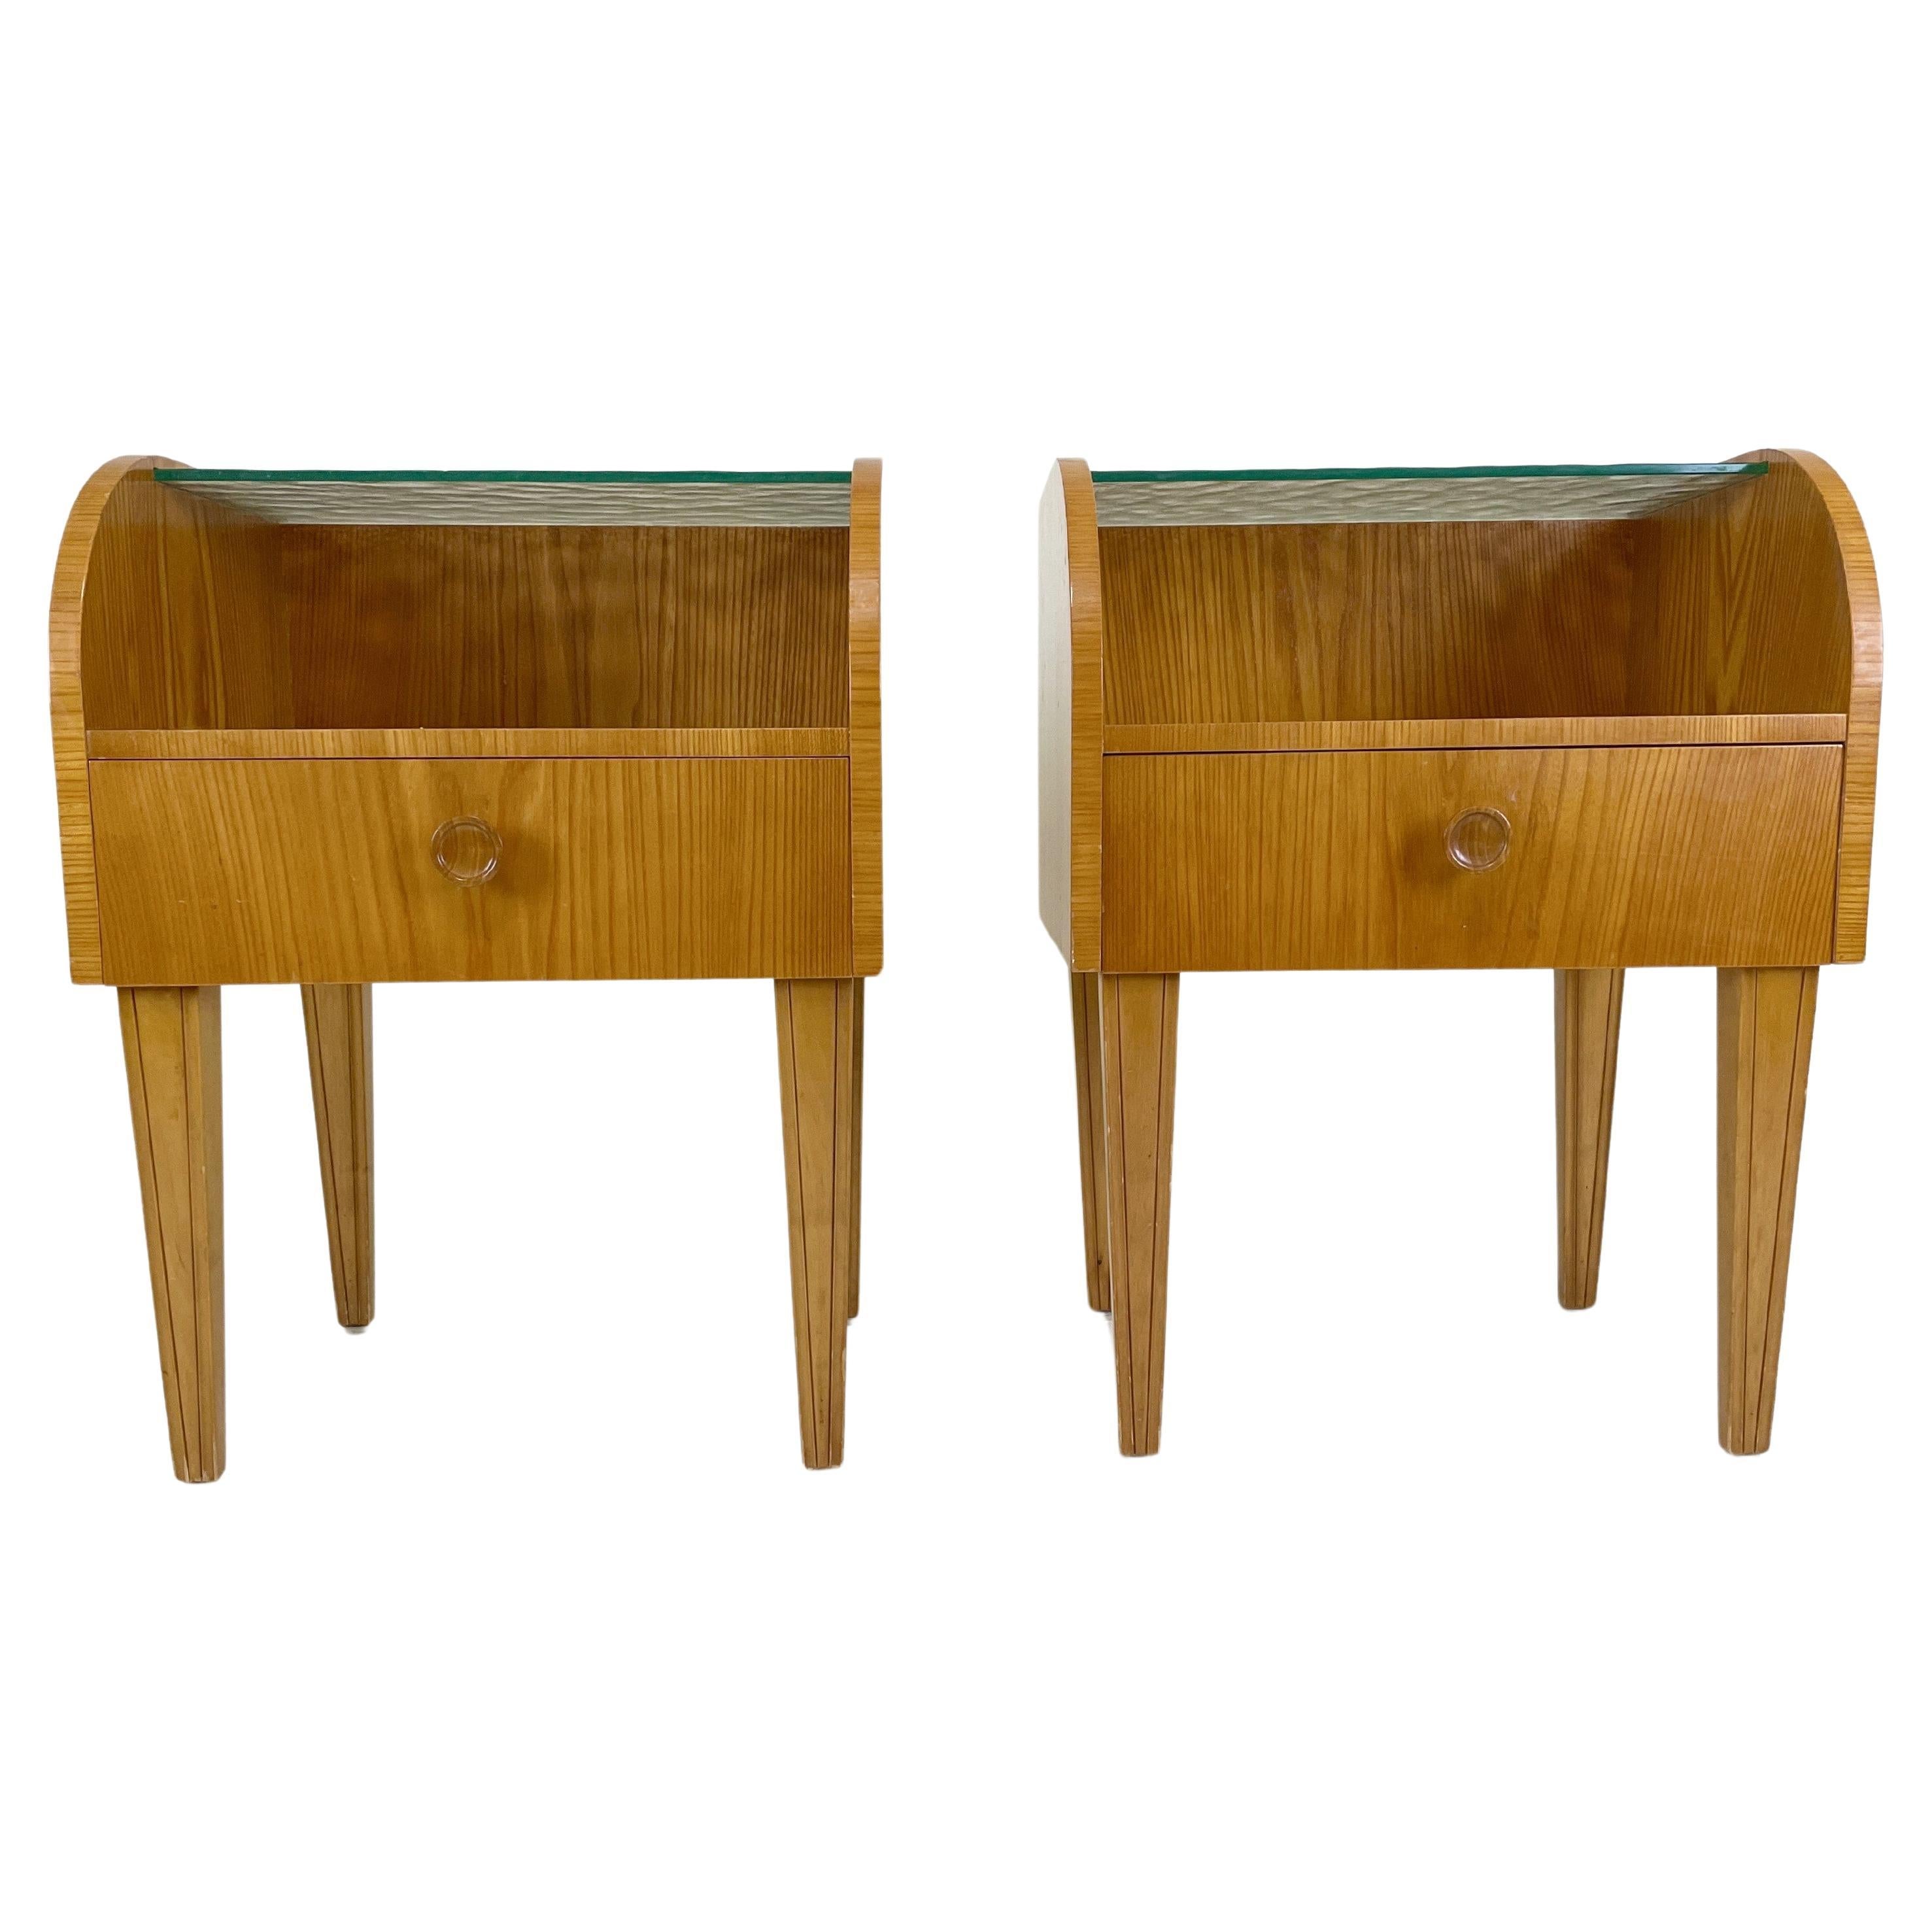 Pair of Finnish Modern Bedside Tables attributed to Margaret Nordman, 1930s For Sale